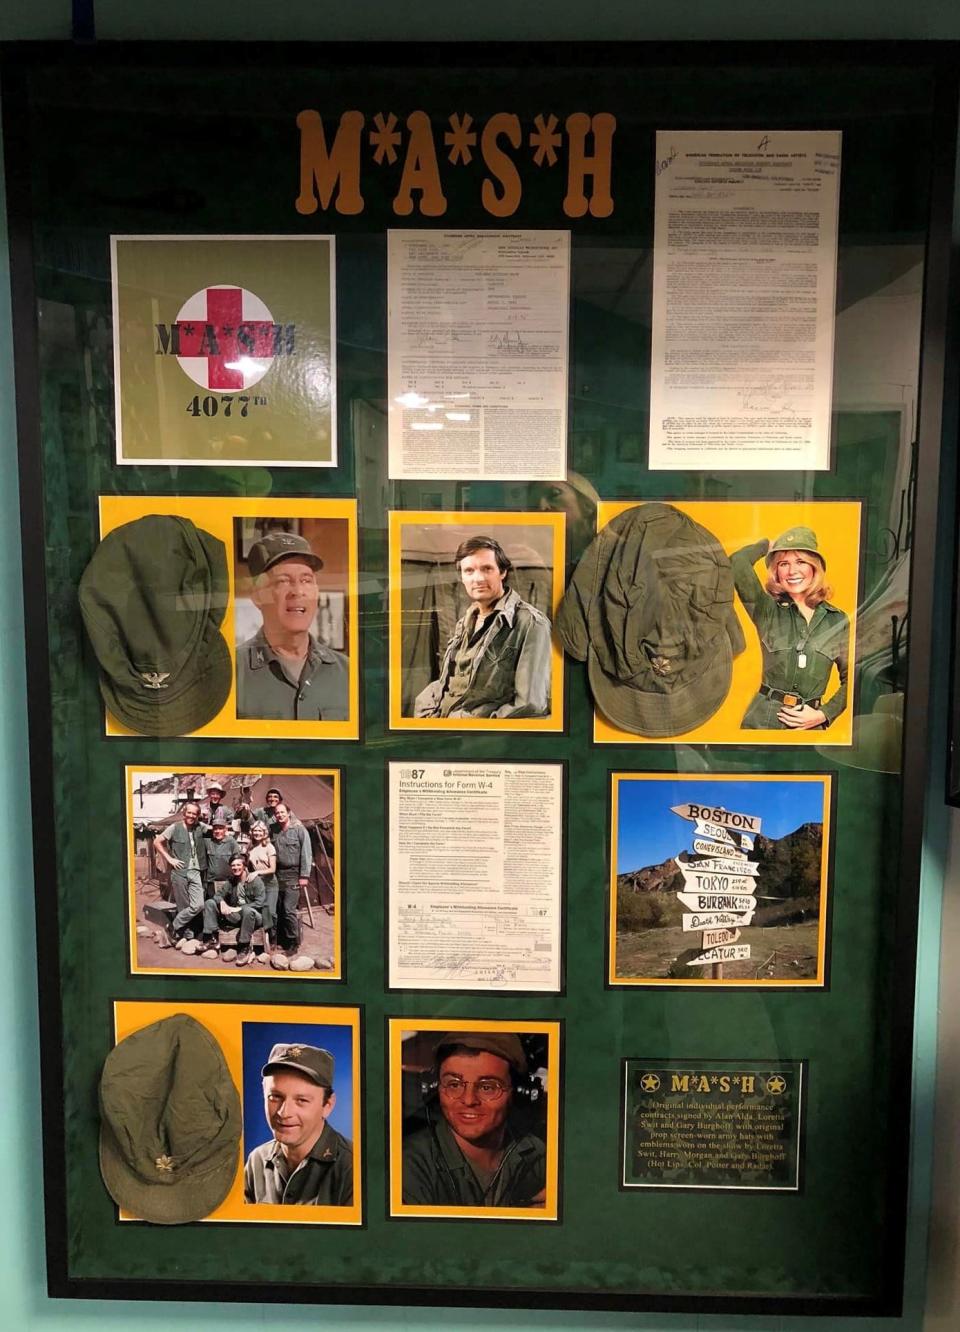 MASH memorabilia owned by Henry Kidd on exhibit at Side Street Gallery in Colonial Heights, Va.